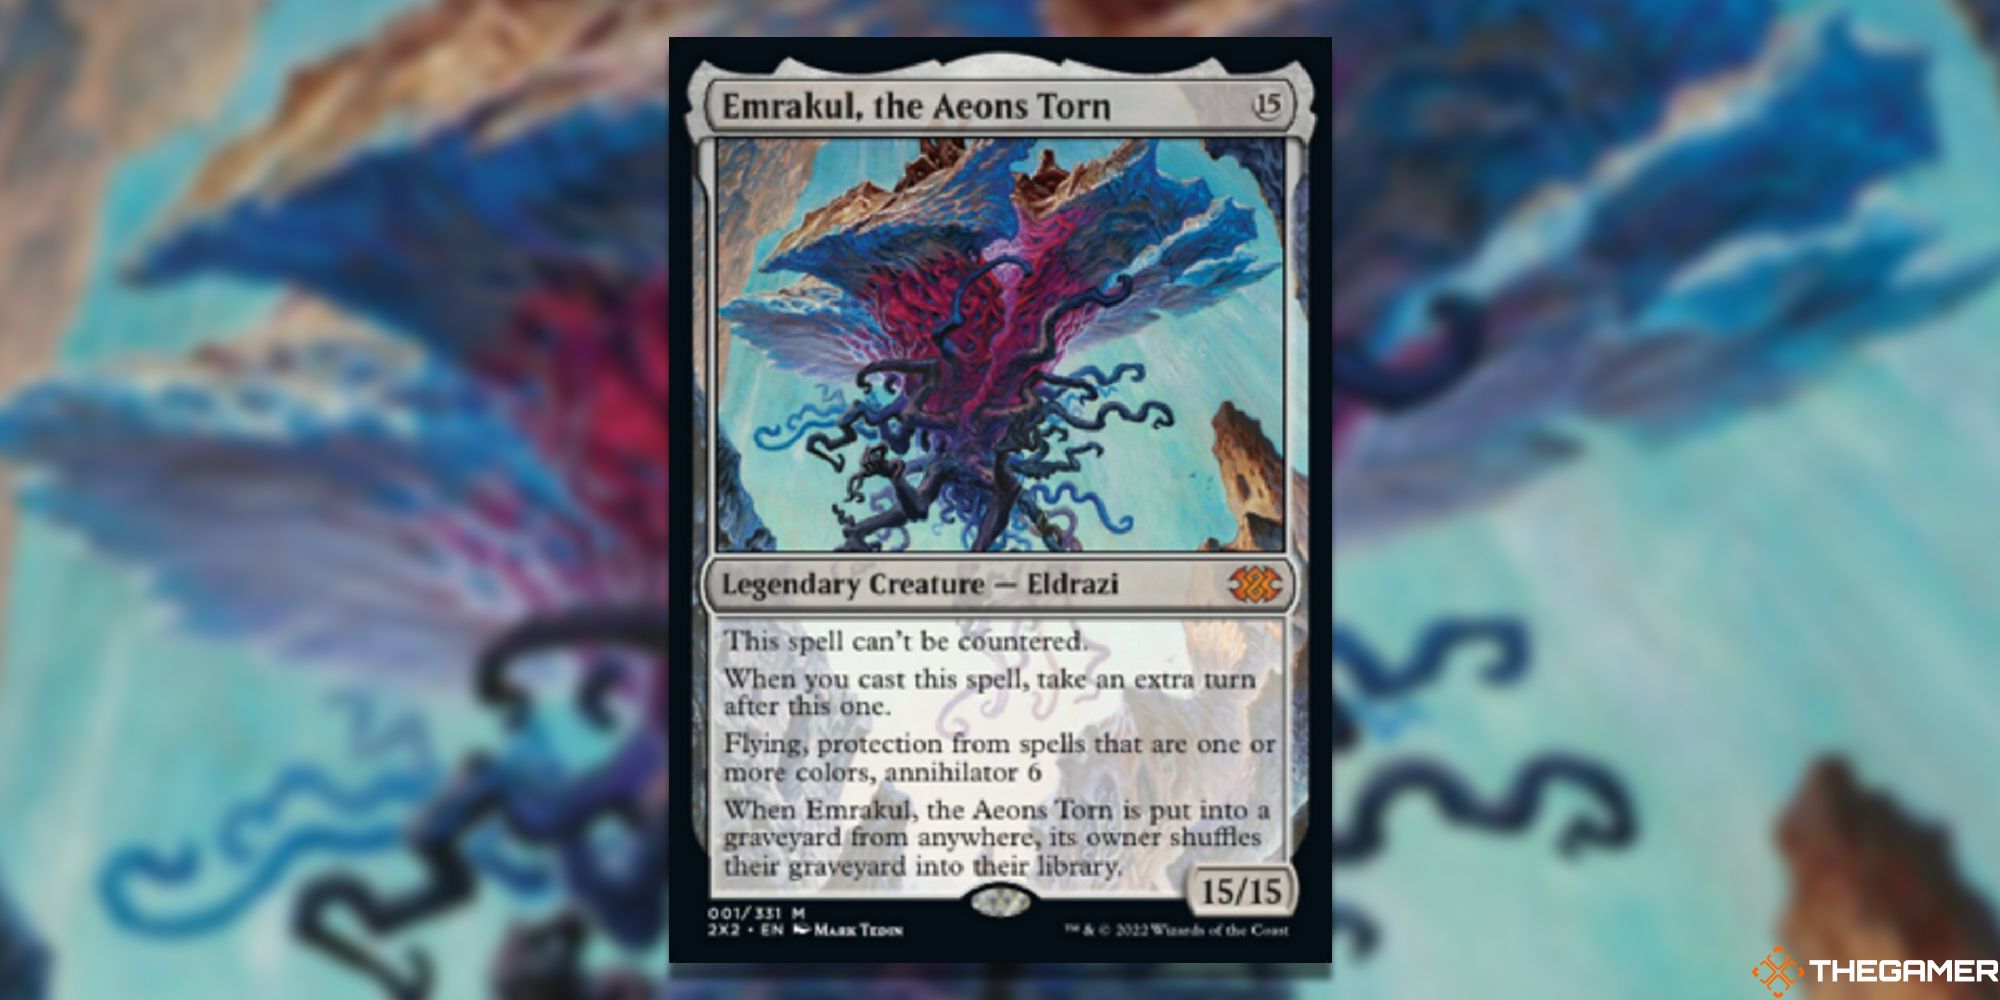 Magic: The Gathering Emrakul, the Aeons Torn full card with background